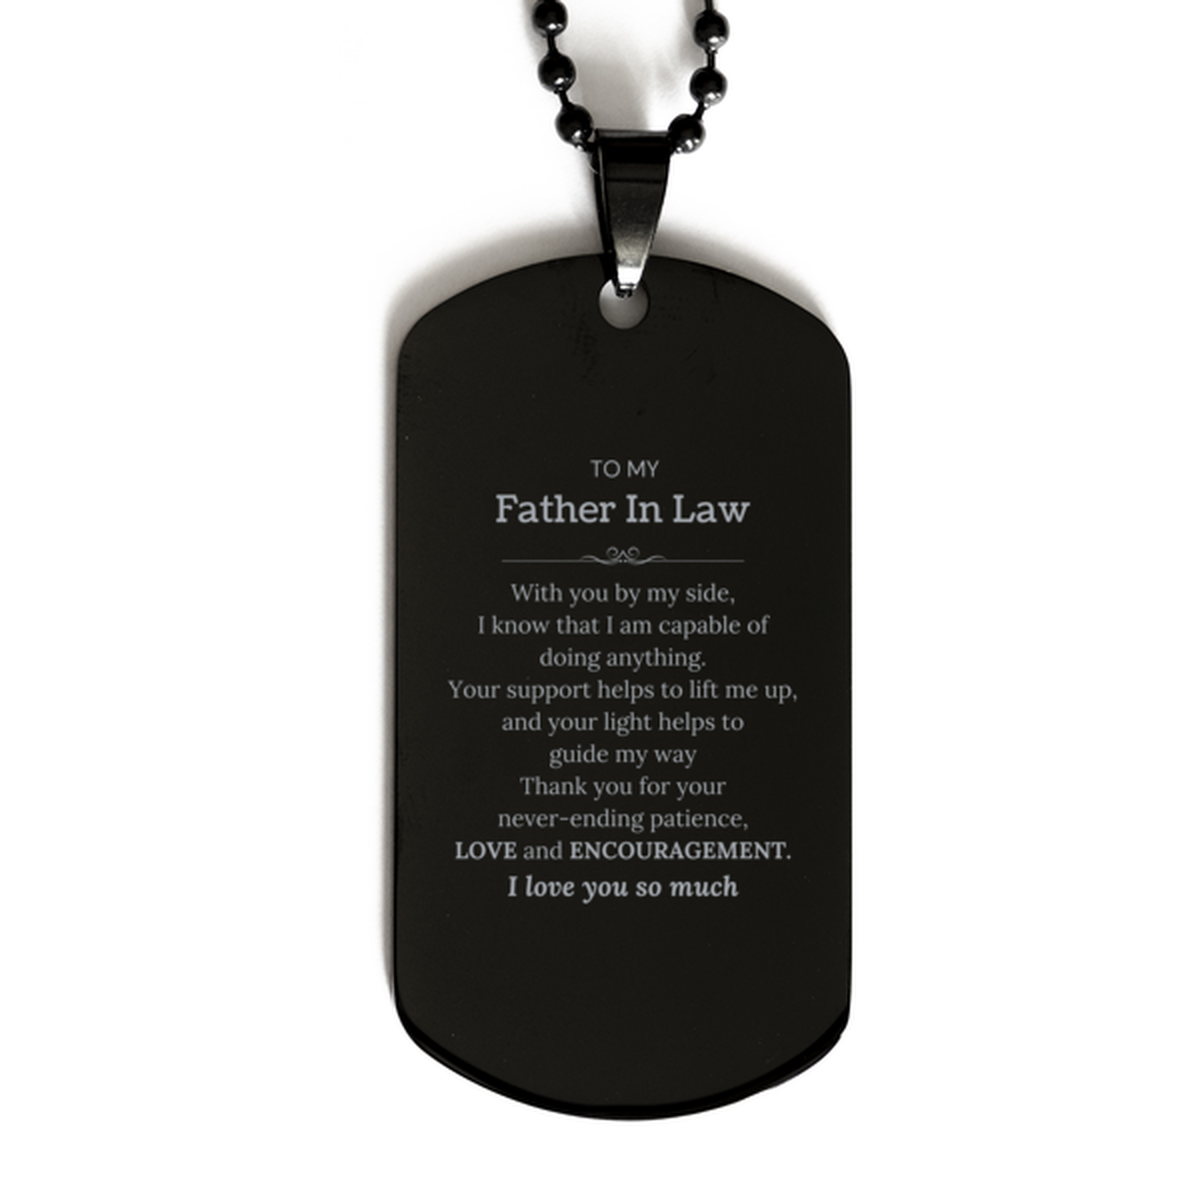 Appreciation Father In Law Black Dog Tag Gifts, To My Father In Law Birthday Christmas Wedding Keepsake Gifts for Father In Law With you by my side, I know that I am capable of doing anything. I love you so much